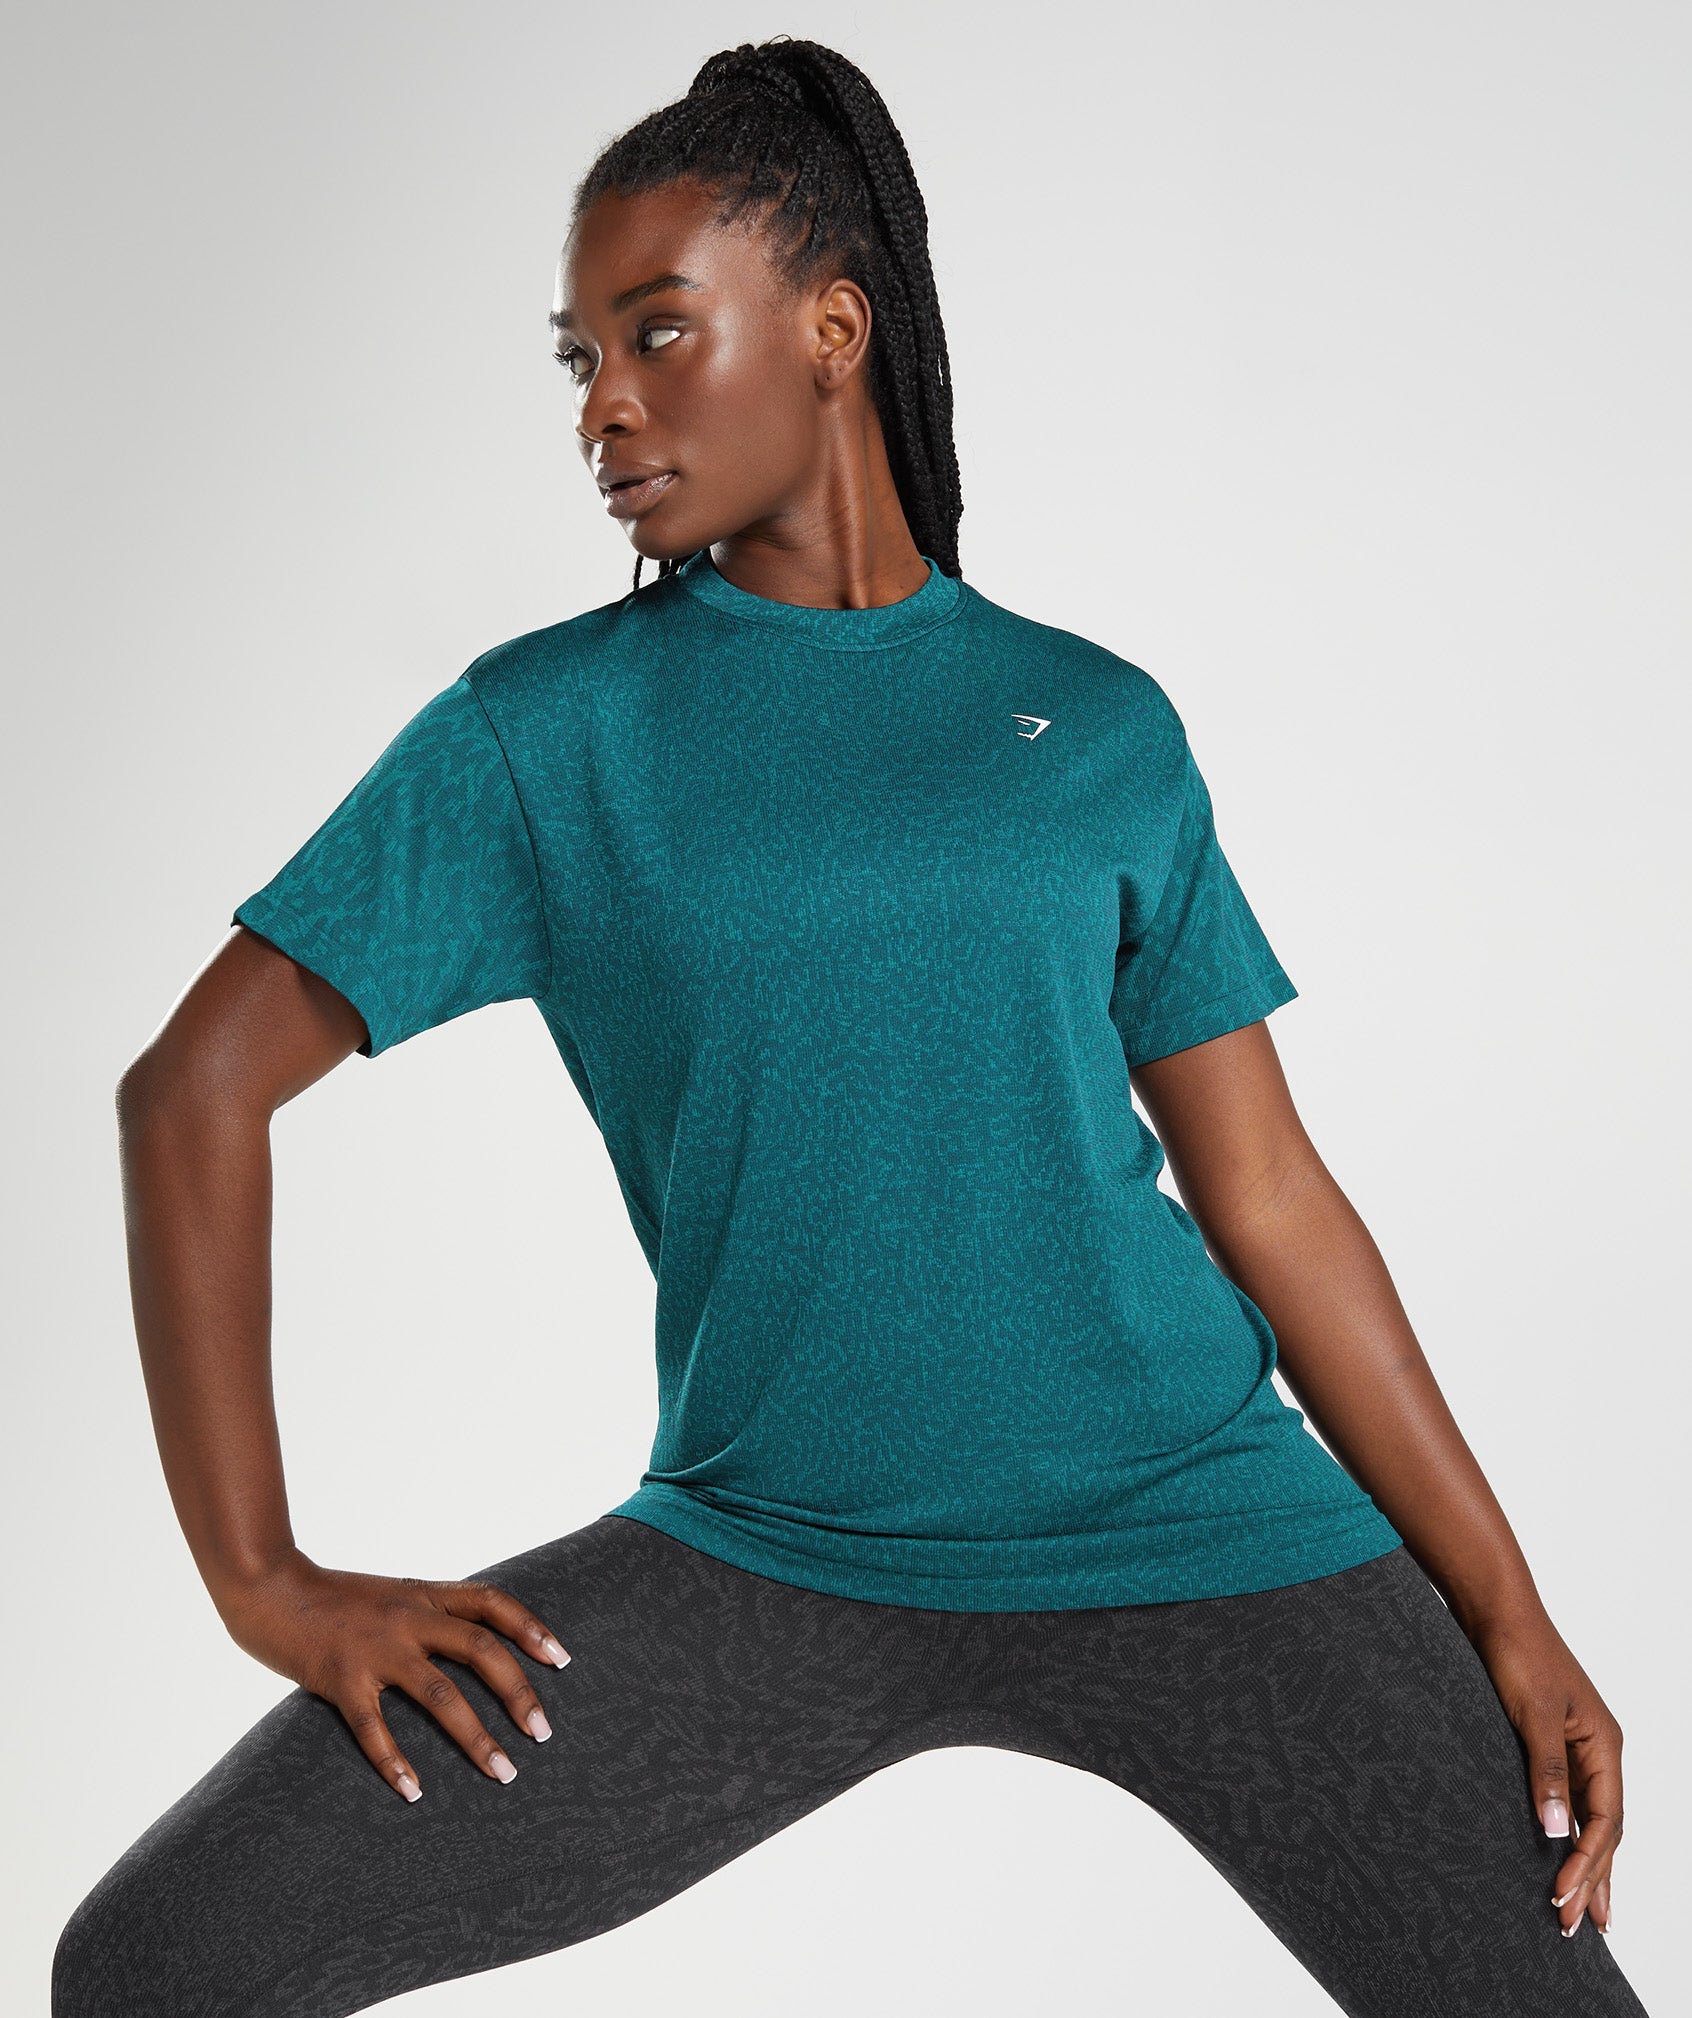 Adapt Animal Seamless T-Shirt in Reef | Winter Teal - view 3